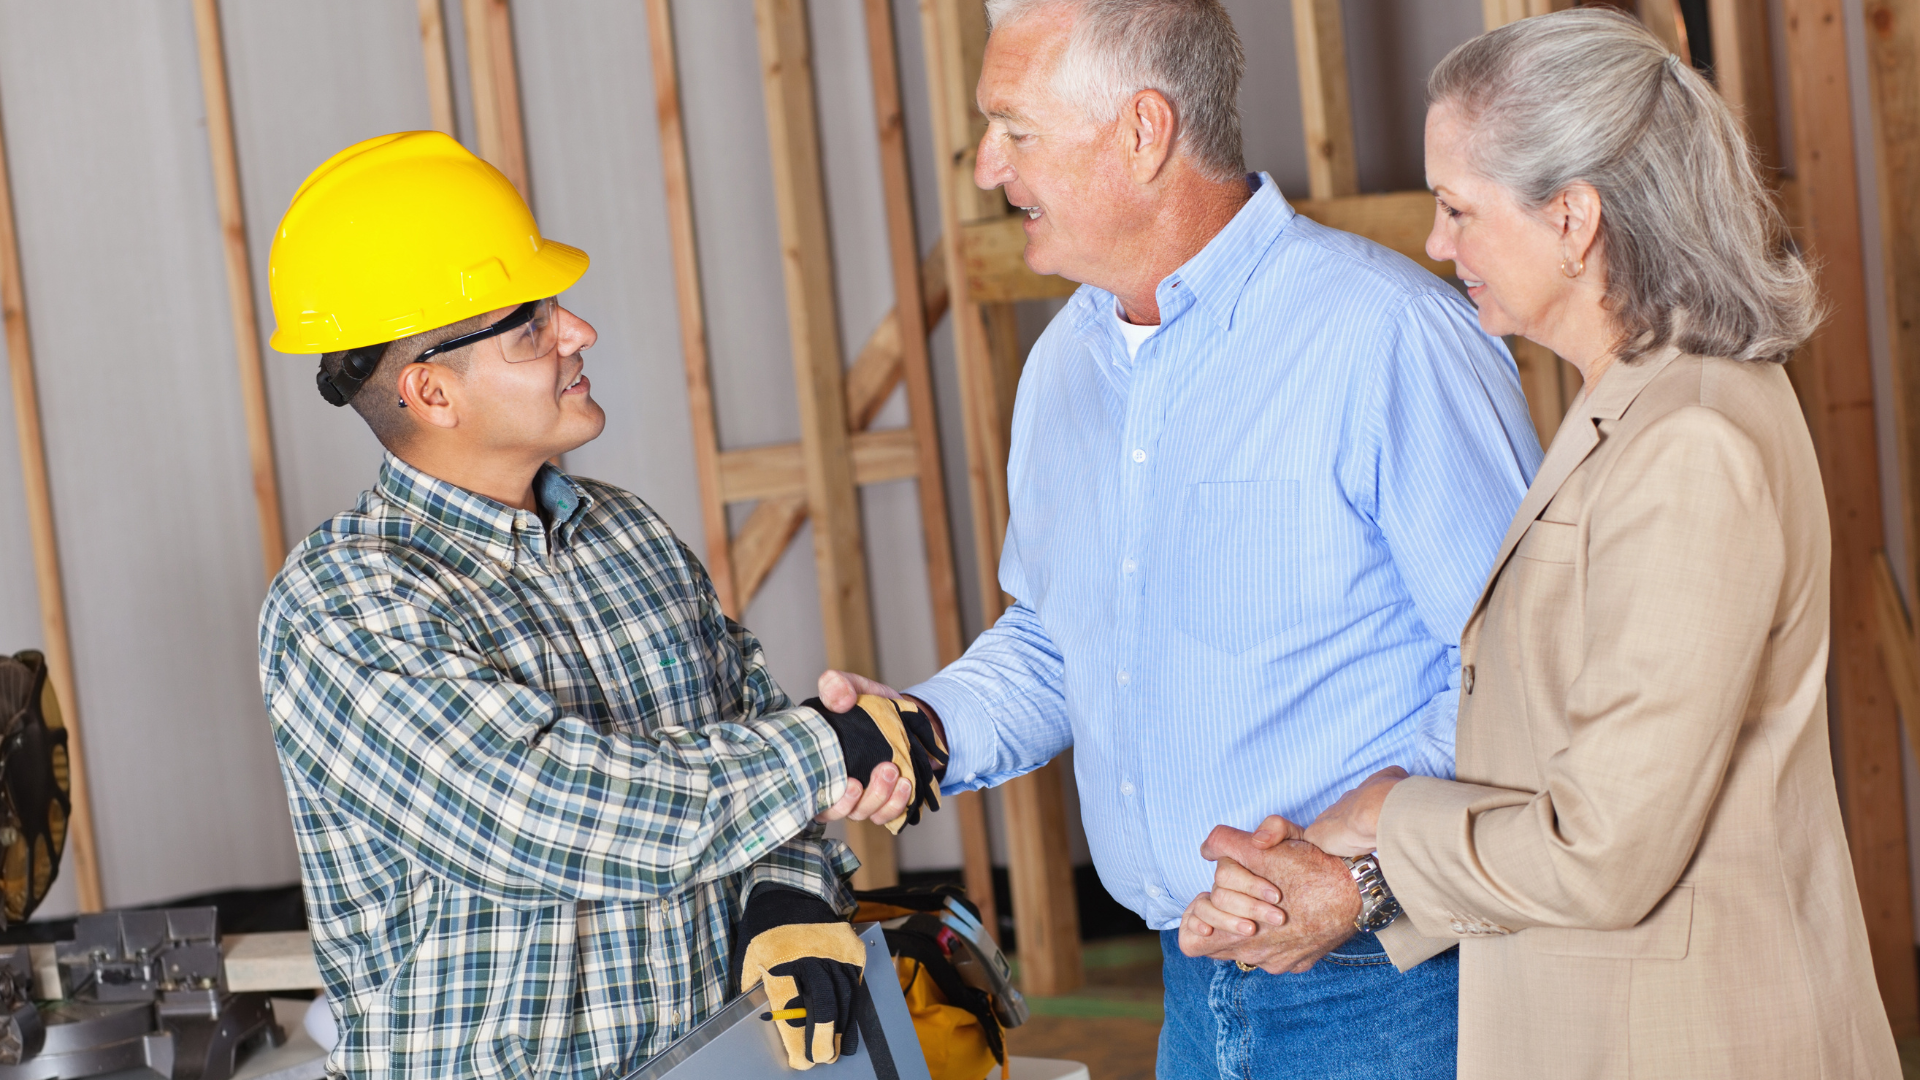 Construction worker with clients, shaking hands